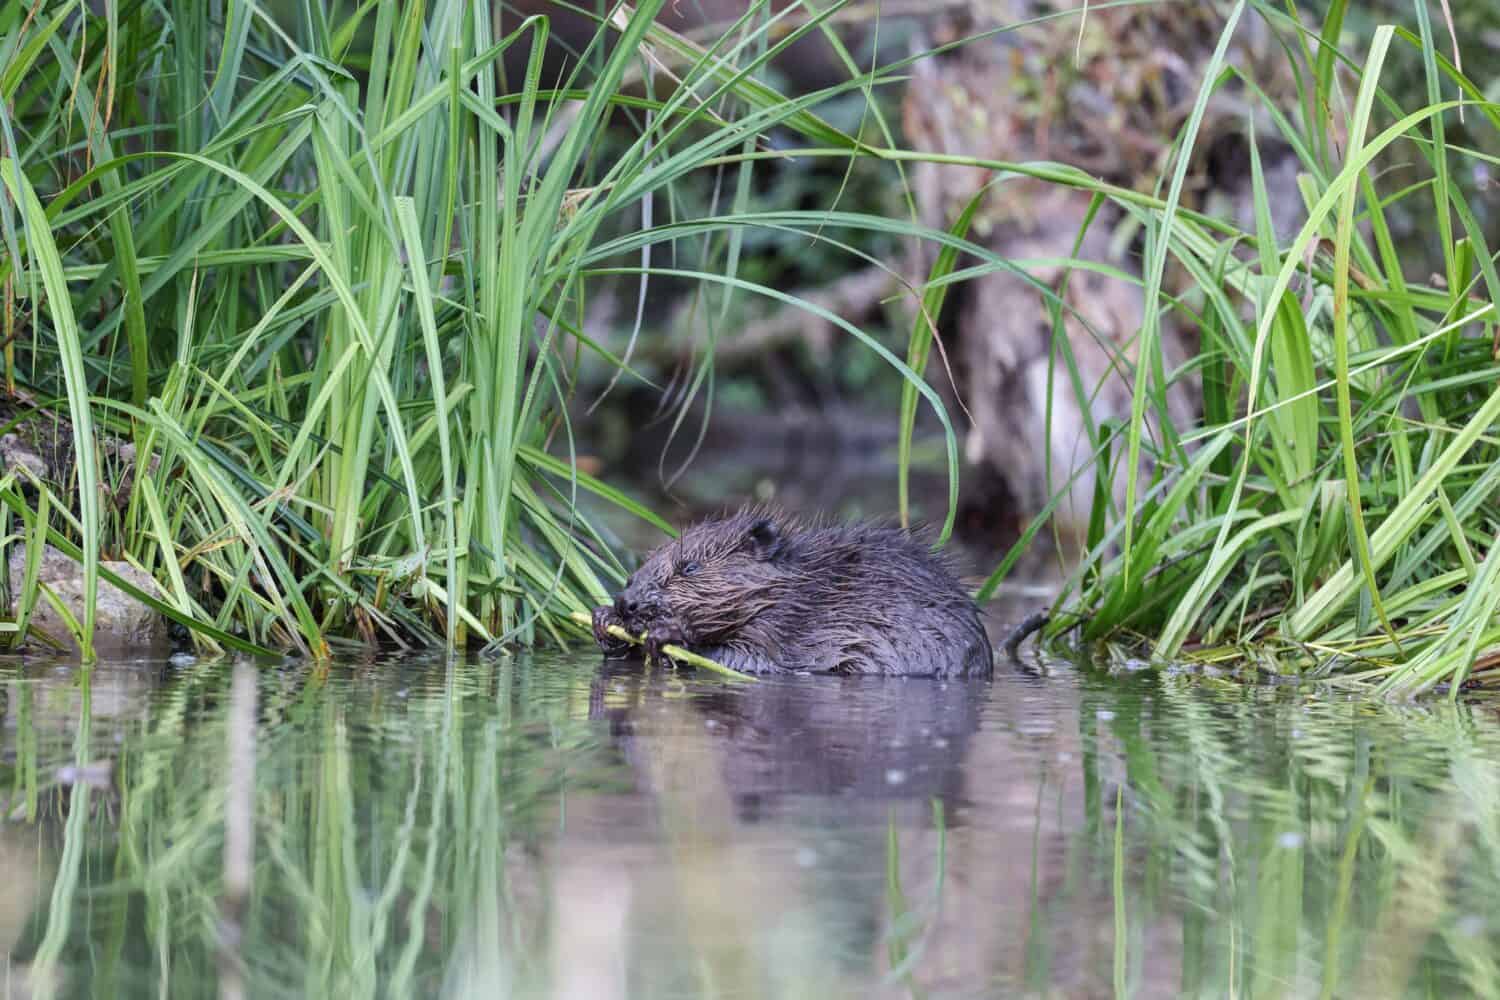 The Eurasian beaver (Castor fiber). Little baby standing in the shallow water and feeding branches. 